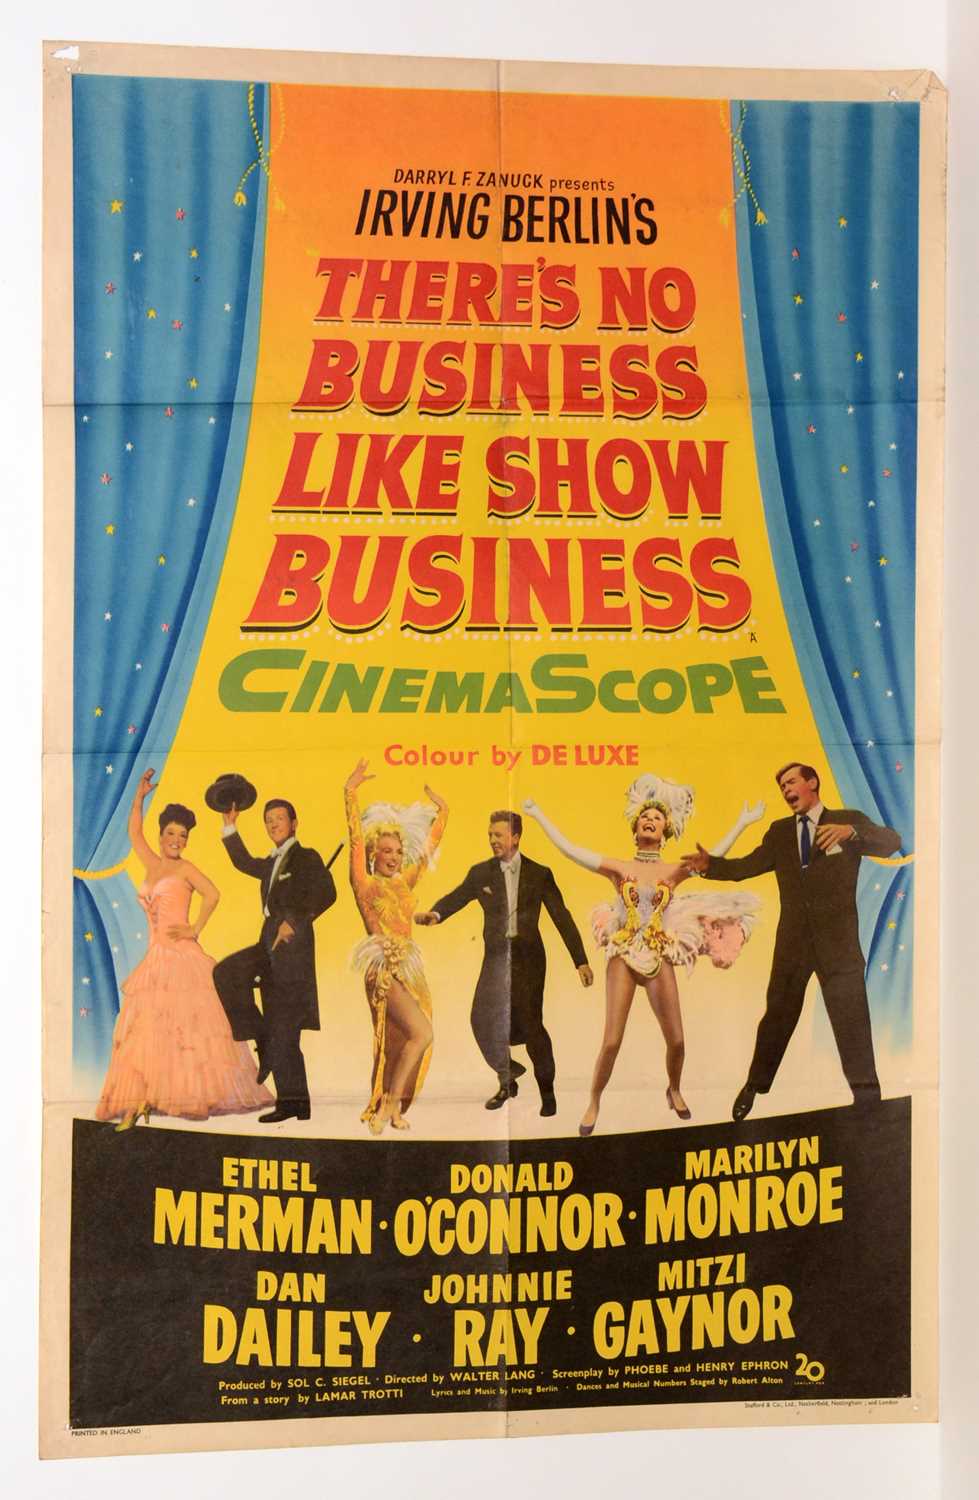 Lot 1278 - British movie poster for "There's No Business Like Show Business"